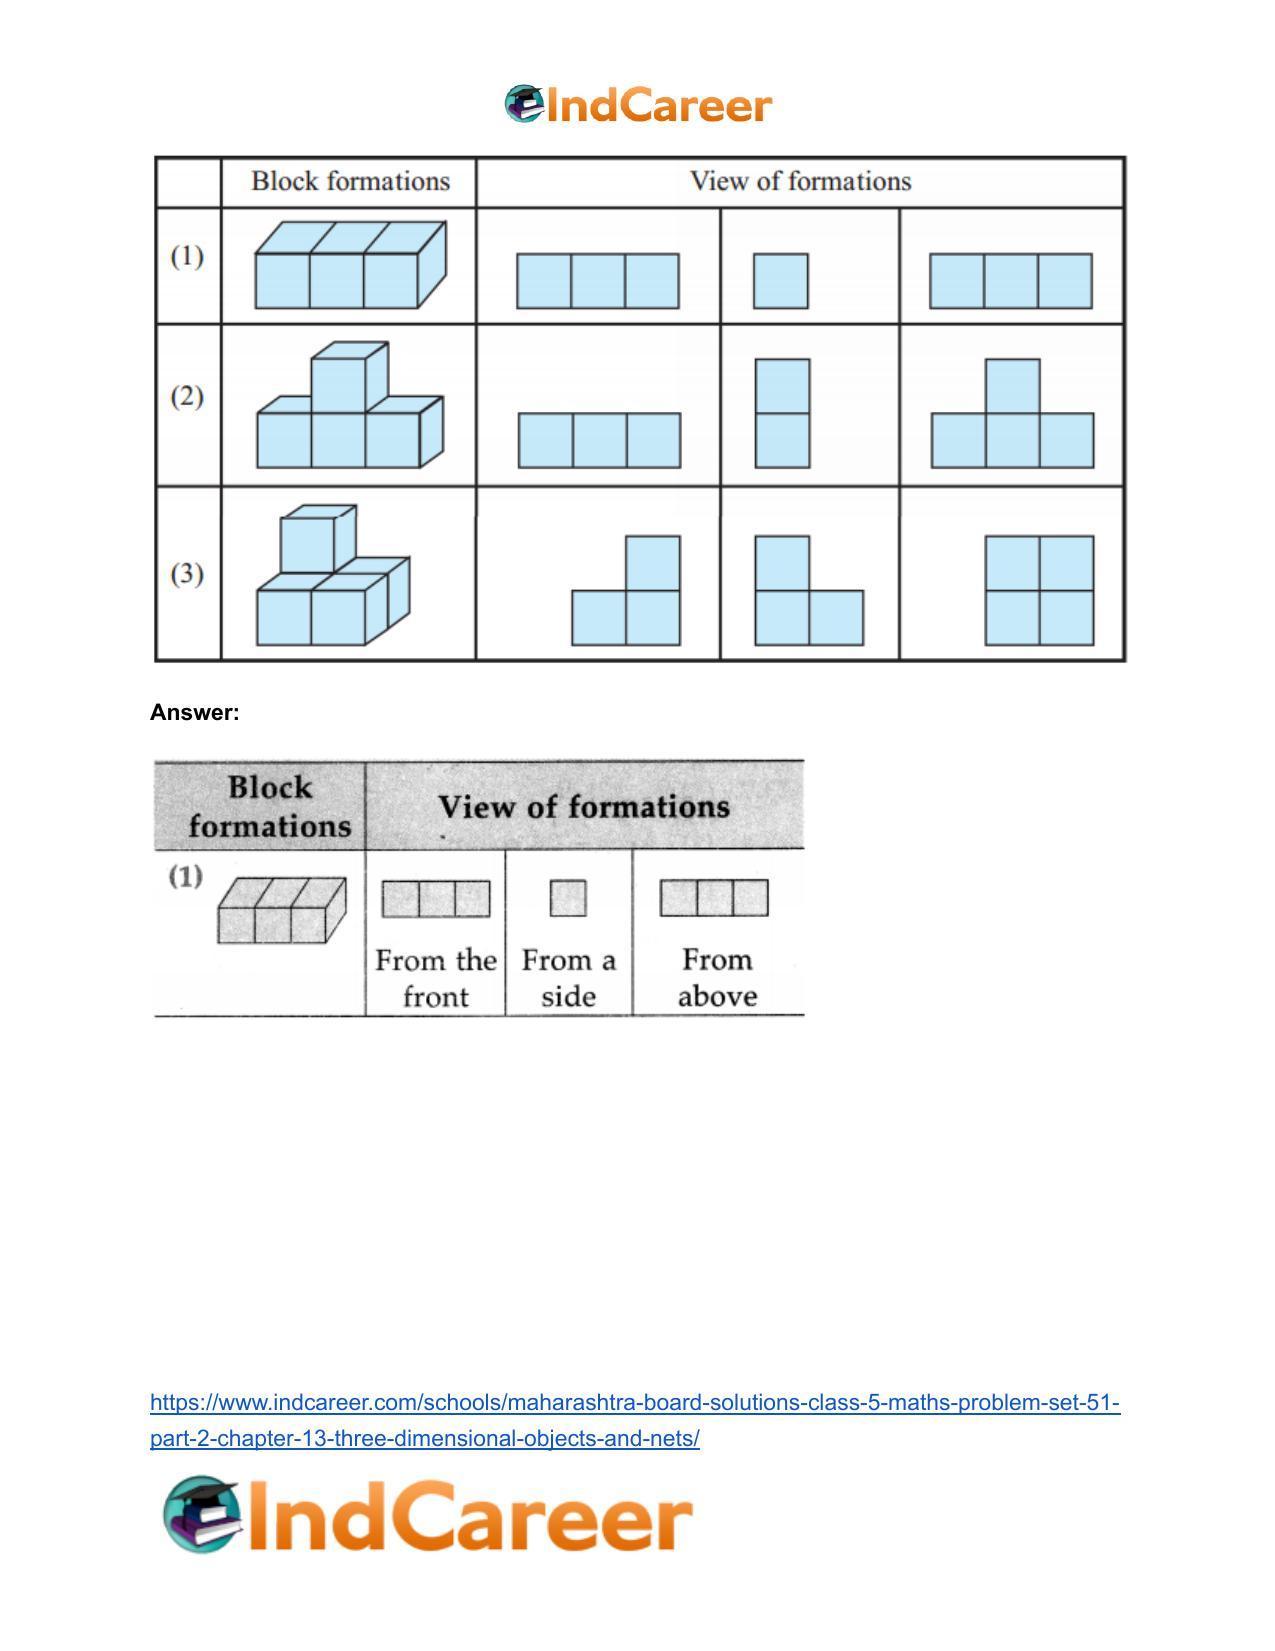 Maharashtra Board Solutions Class 5-Maths (Problem Set 51) - Part 2: Chapter 13- Three Dimensional Objects and Nets - Page 3